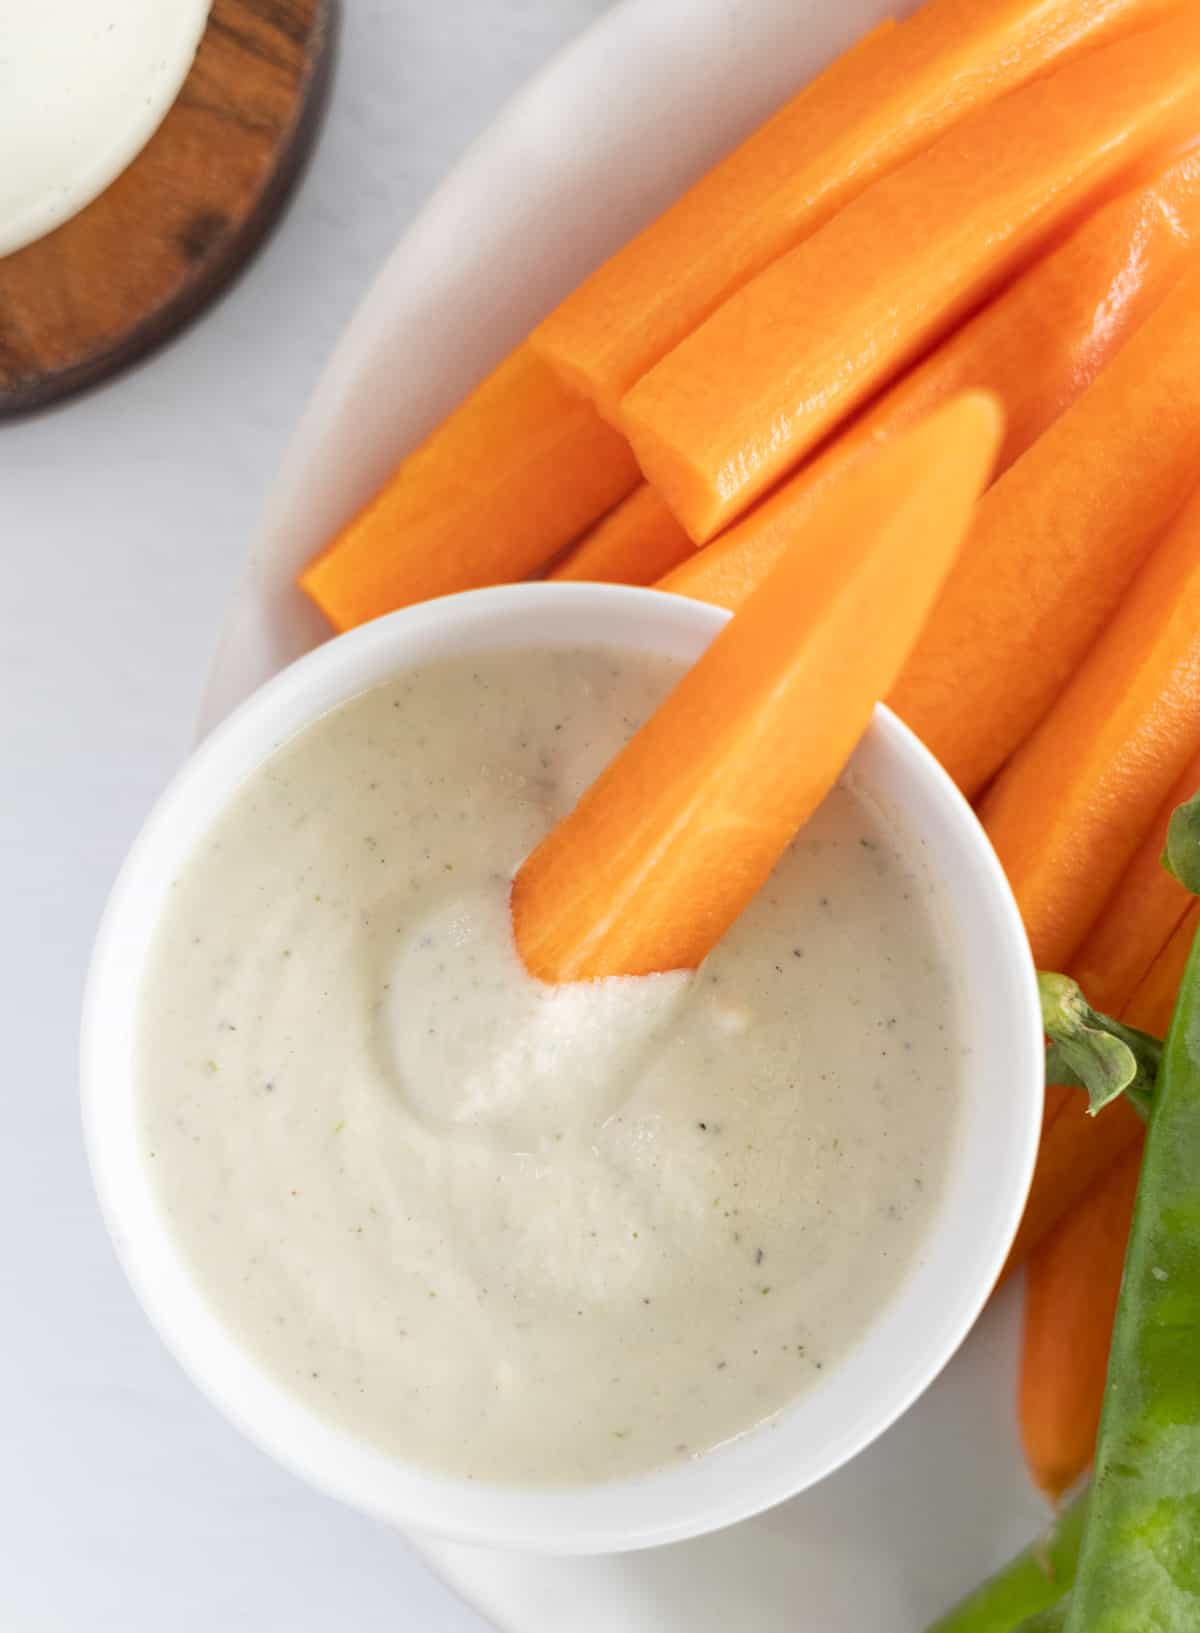 a carrot stick dipped in white sauce